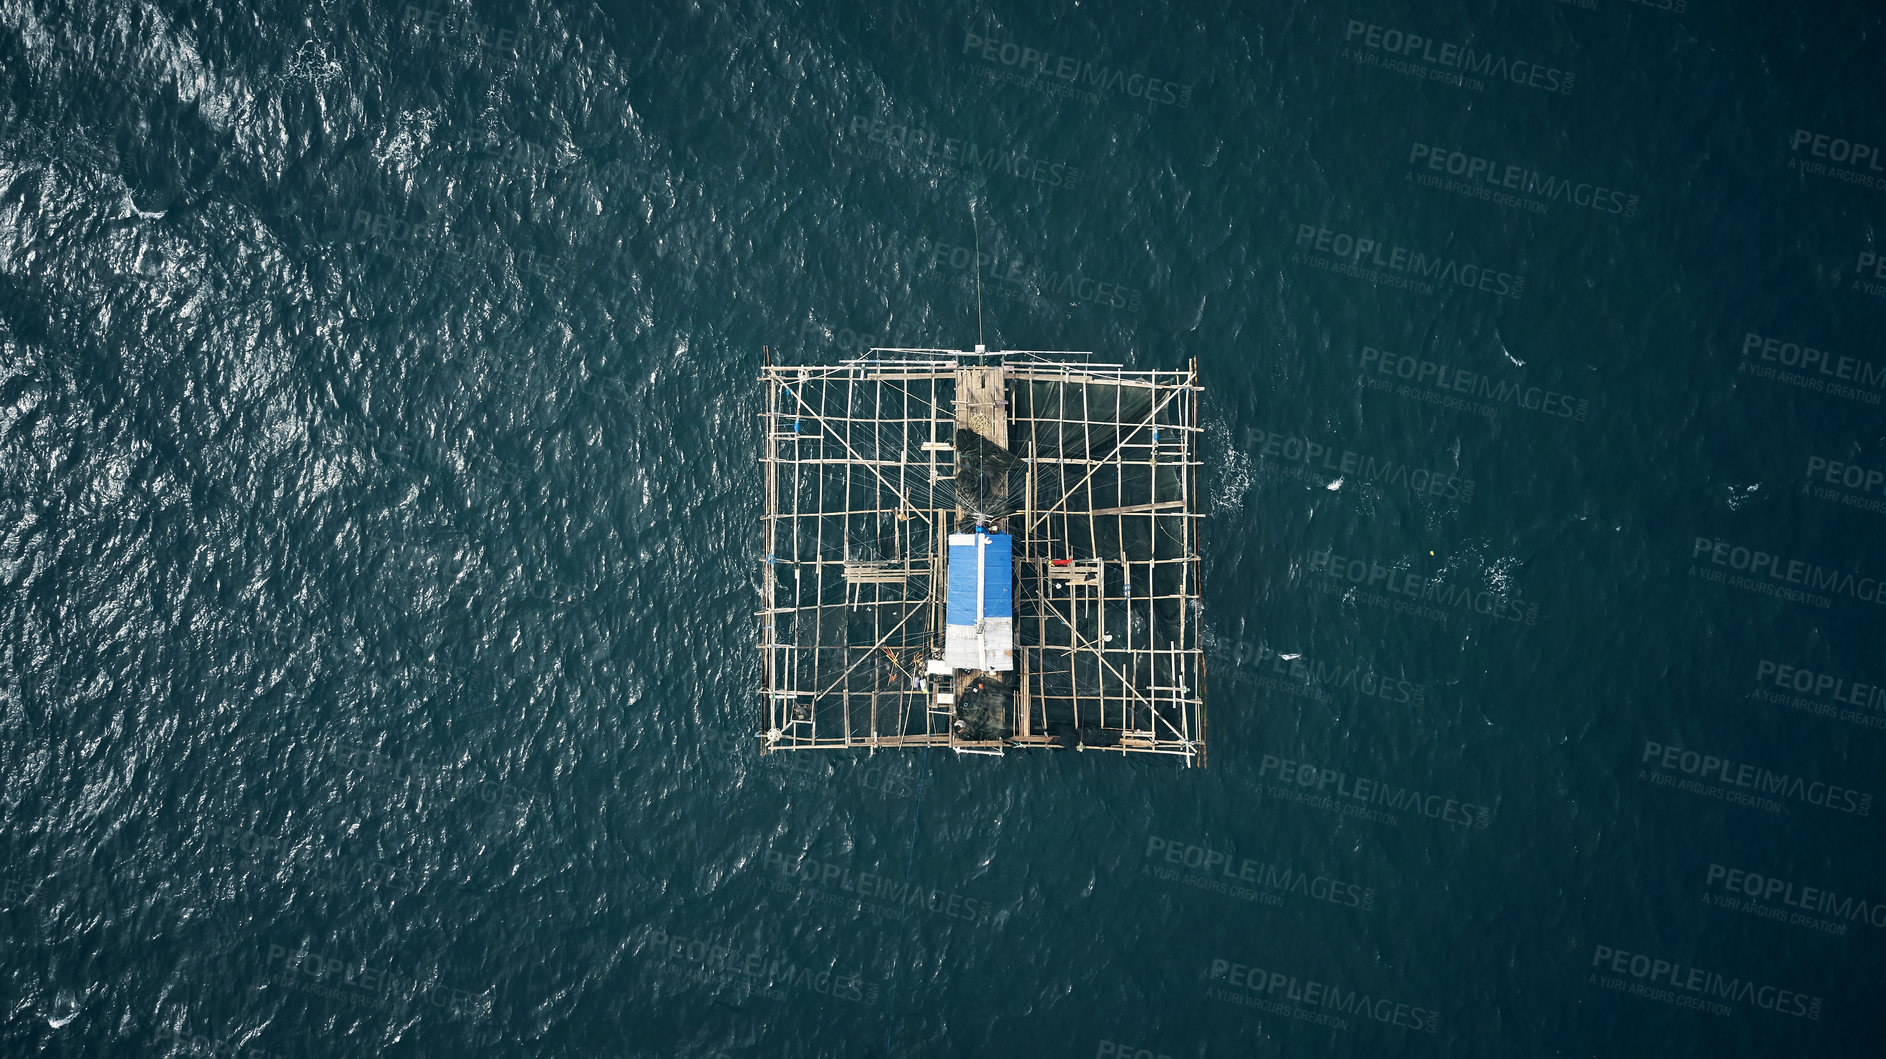 Buy stock photo High angle shot of a built fishing structure floating in the middle of the ocean called a kelong